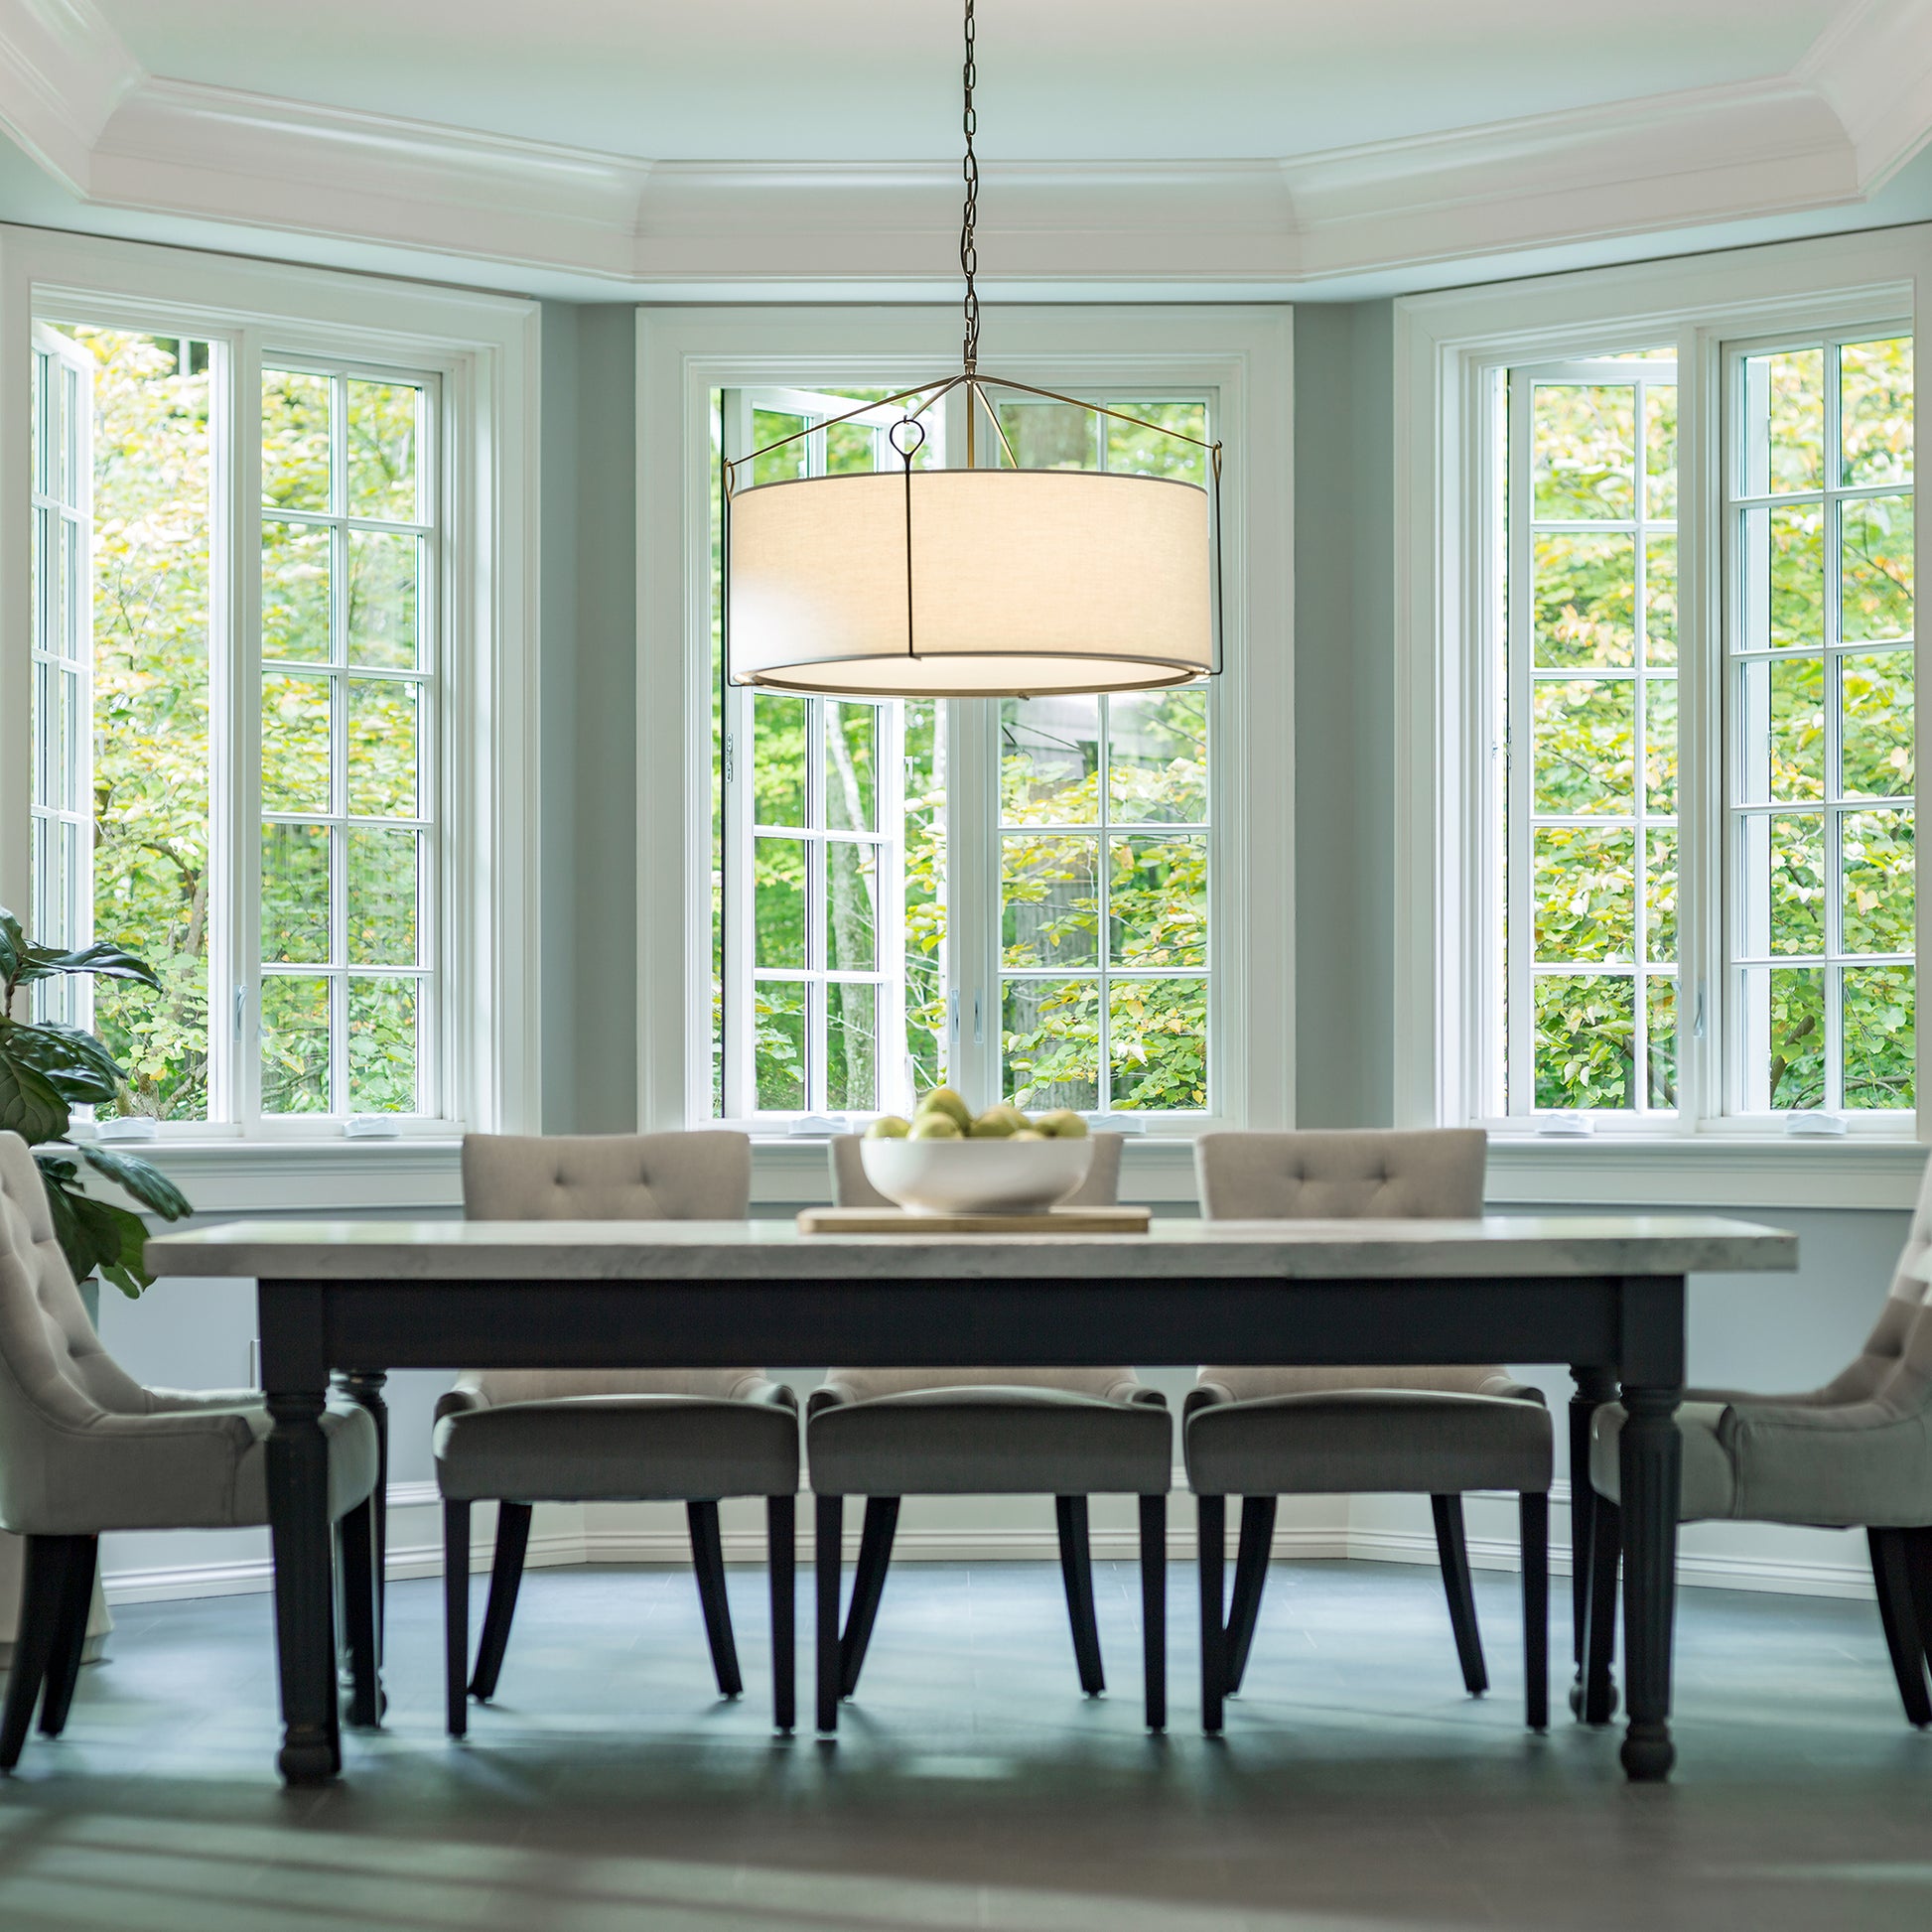 A bright and elegant dining room featuring a large wooden table with six chairs, a Hubbardton Forge Bow Large Pendant lamp above, and surrounded by tall windows showing lush greenery outside.